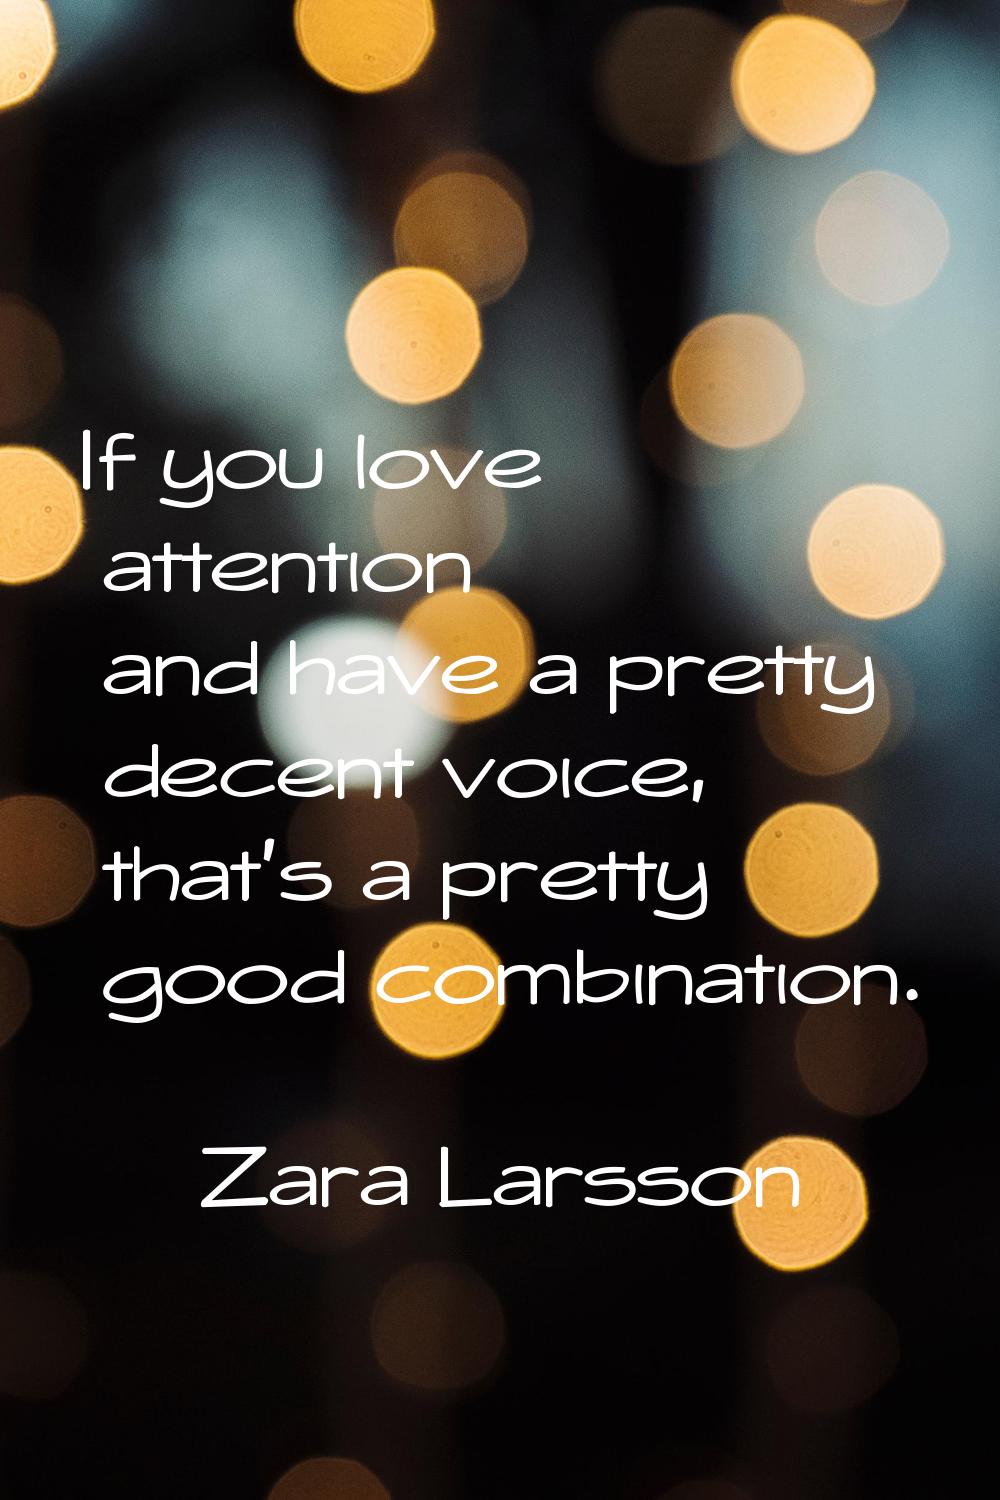 If you love attention and have a pretty decent voice, that's a pretty good combination.